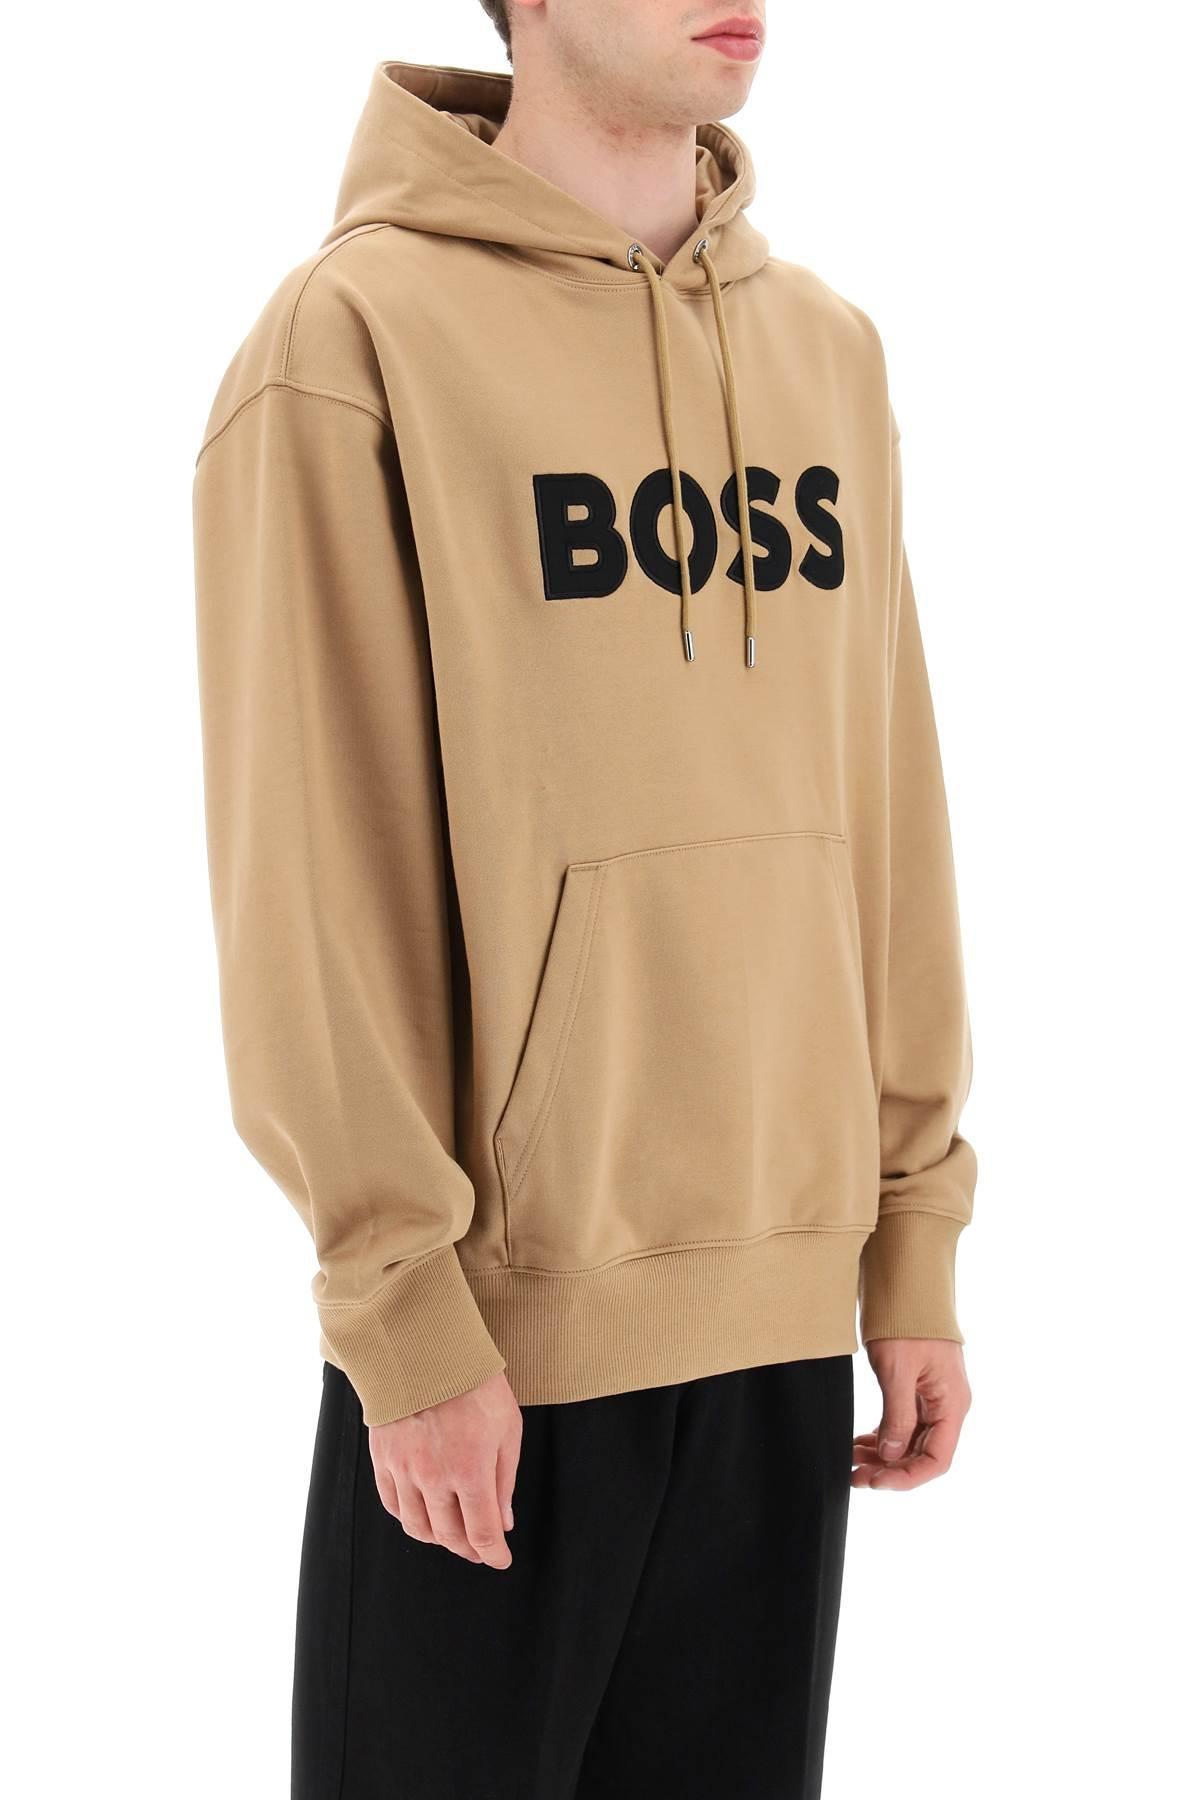 BOSS by HUGO BOSS Logo Patch Hoodie in Natural for Men | Lyst